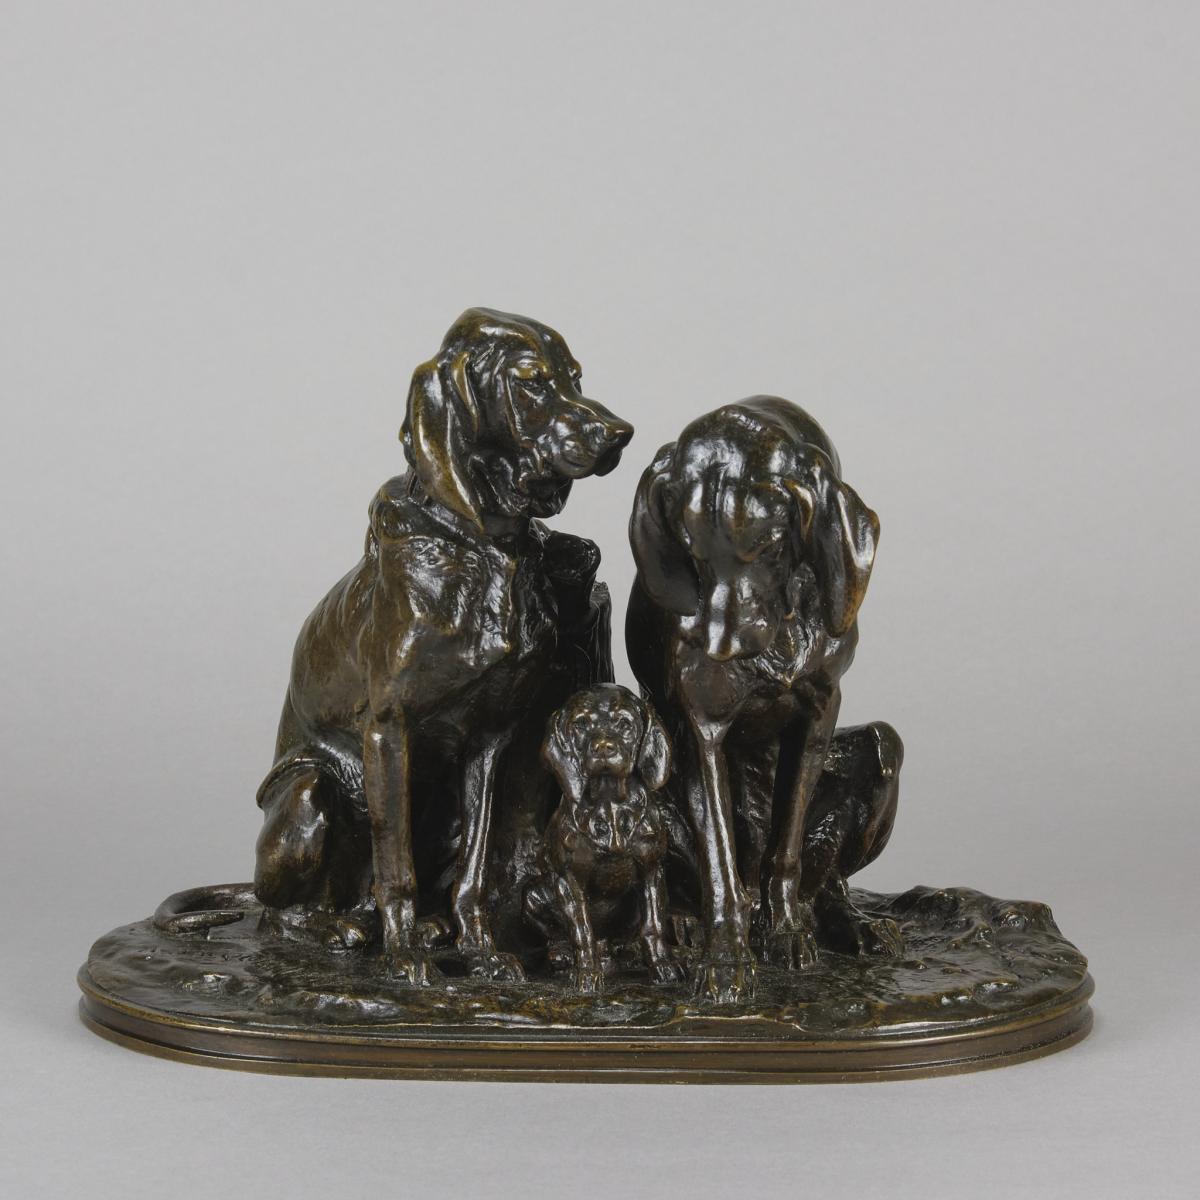 Late 19th Century Animalier Bronze entitled "Hound Family" by Alfred Jacquement